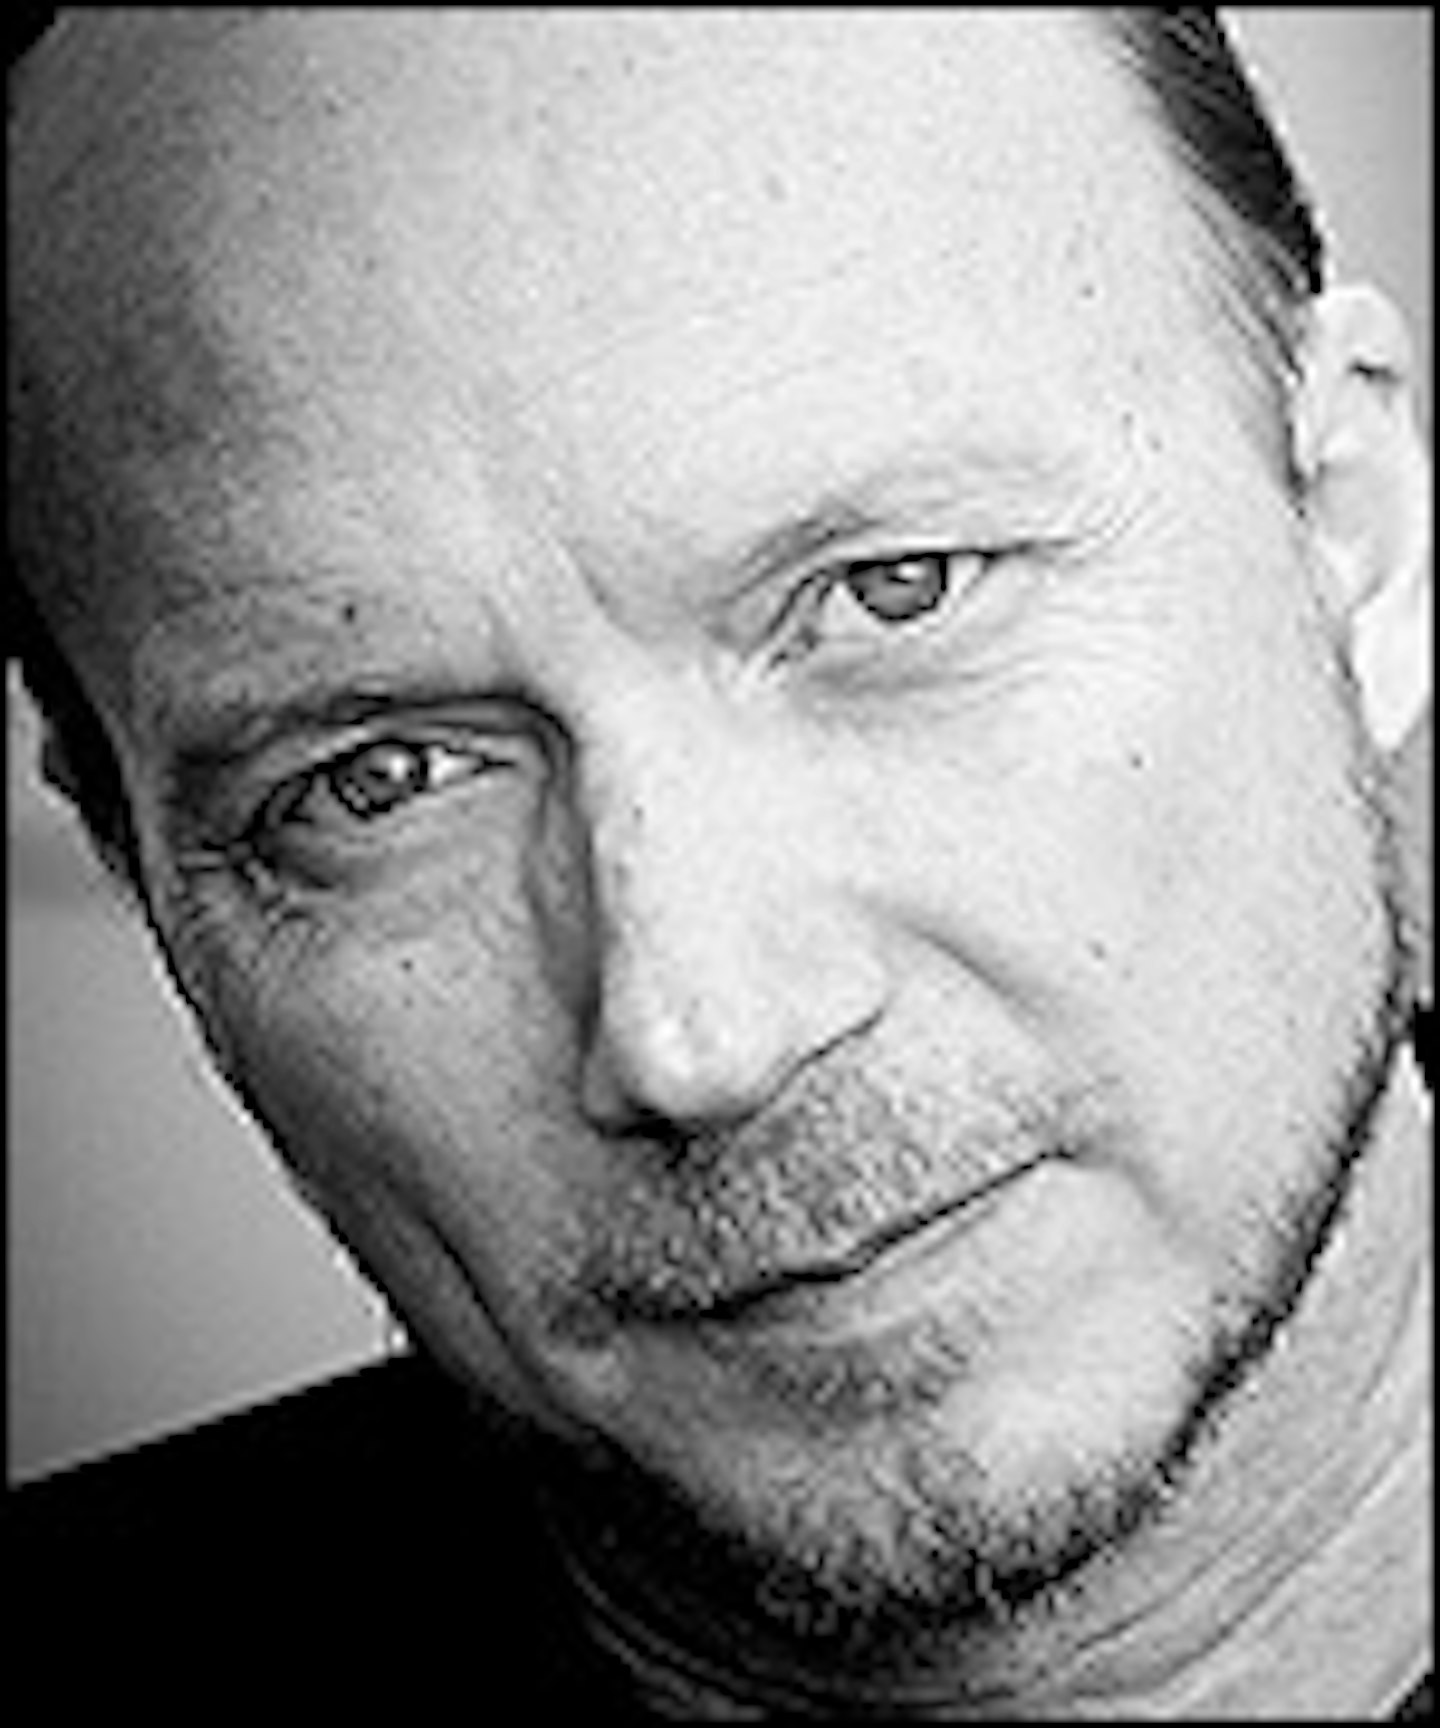 Paul Haggis Signs Up For Next Three Days